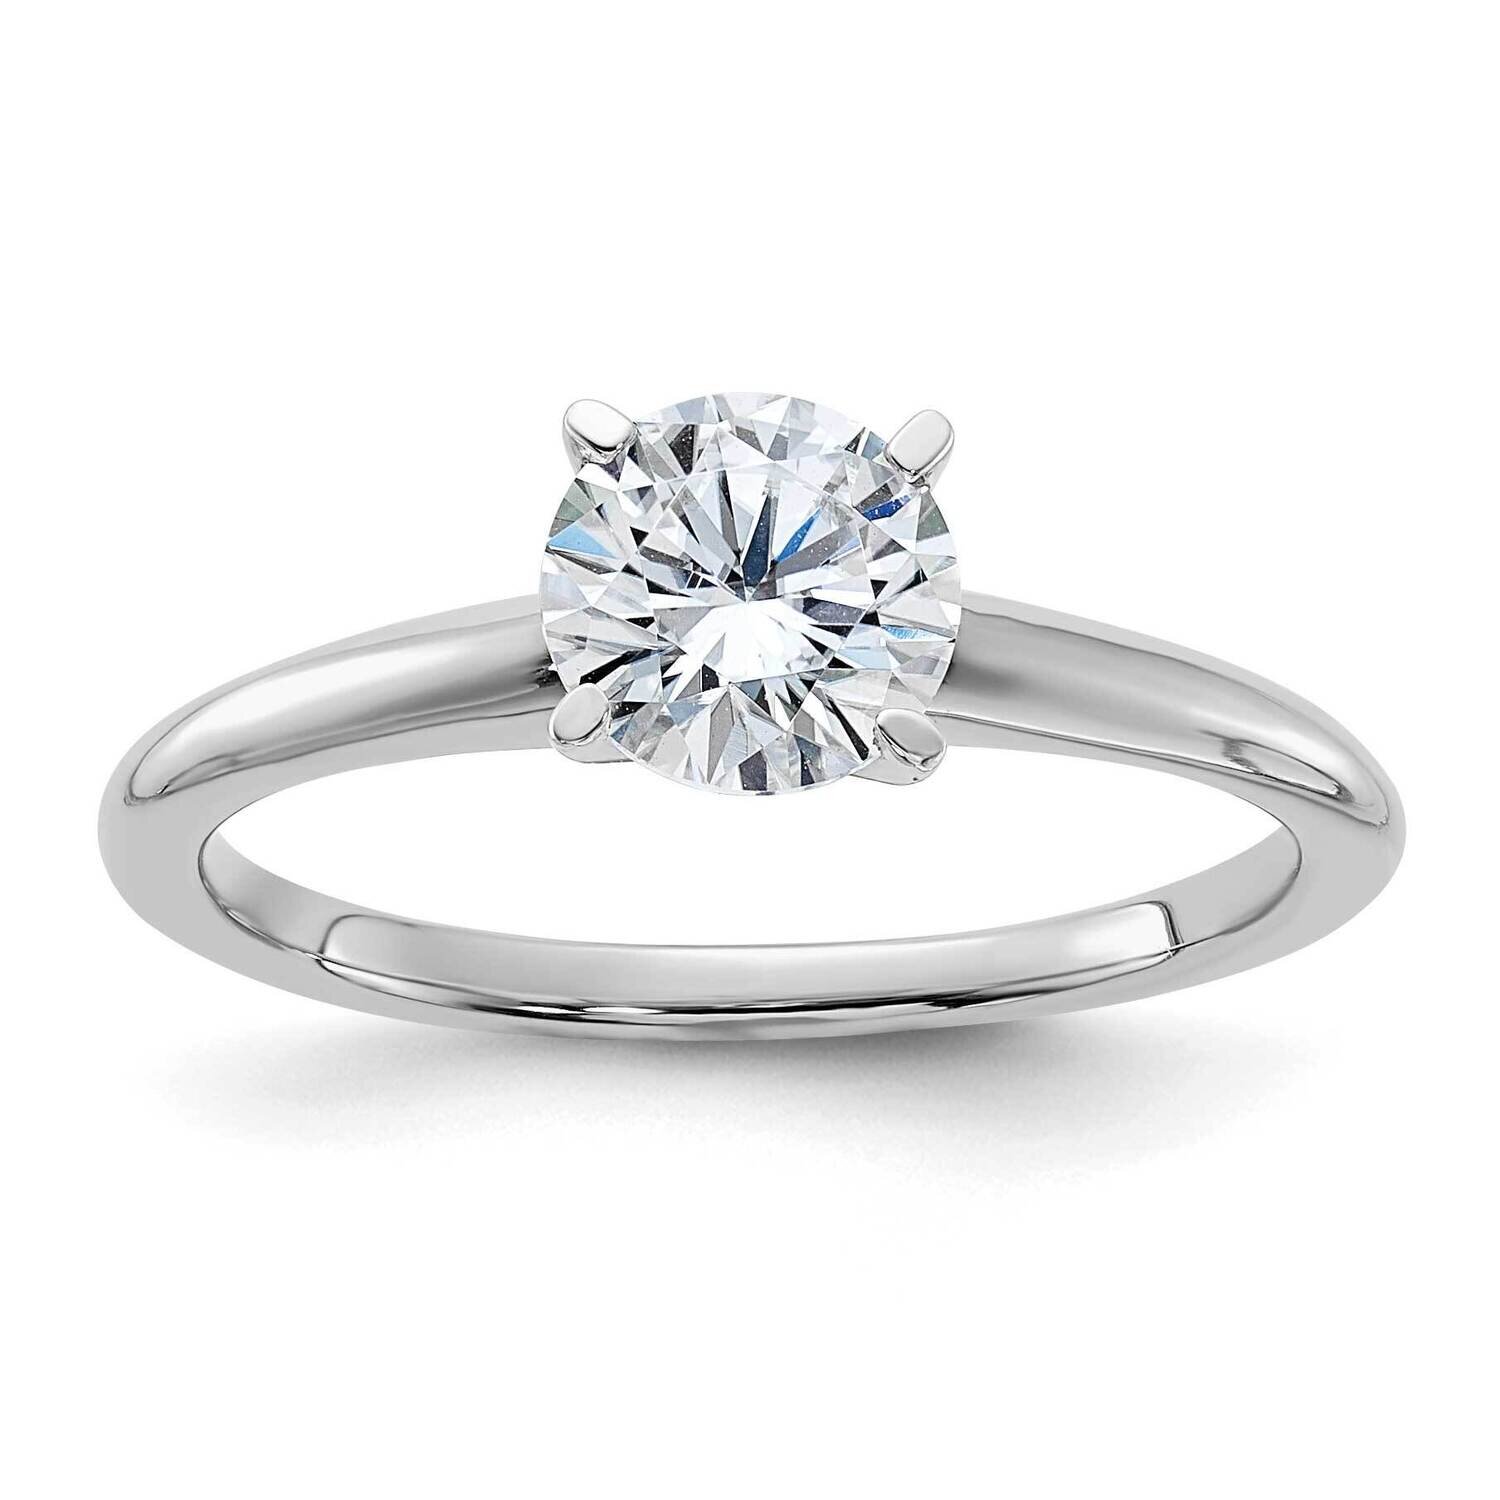 1ct. D E F Pure Light Round Moissanite Solitaire Ring 14k White Gold RM5965WR-100-10MP